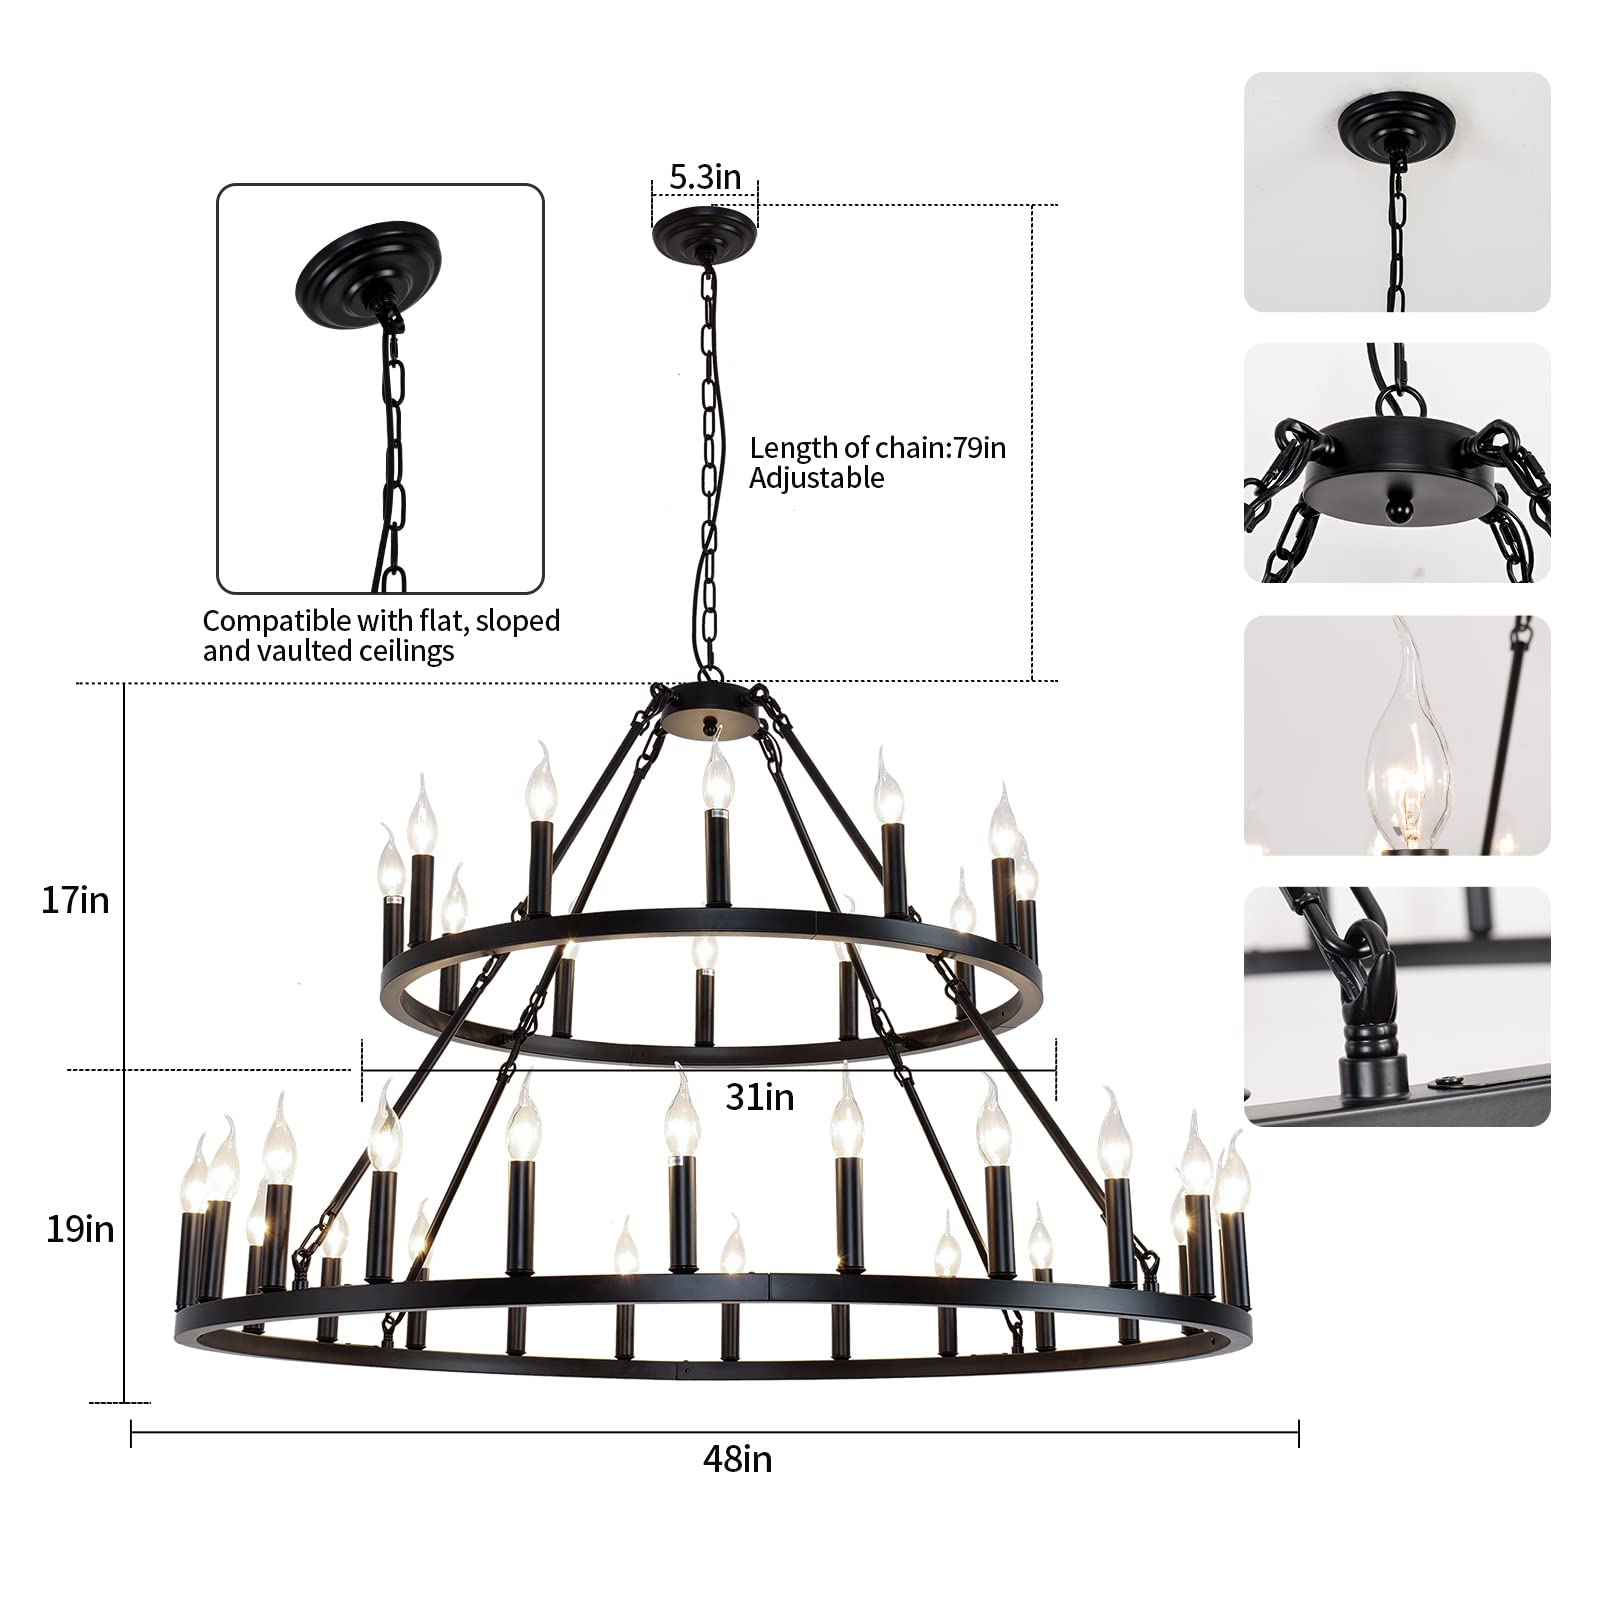 WOGON WEEL Wagon Wheel Chandelier 2 Tier 36-Light 48-inch, Black Farmhouse Industrial Chandelier Rustic Candle Pendant Light Extra Large for High Ceilings, Living Room Foyer